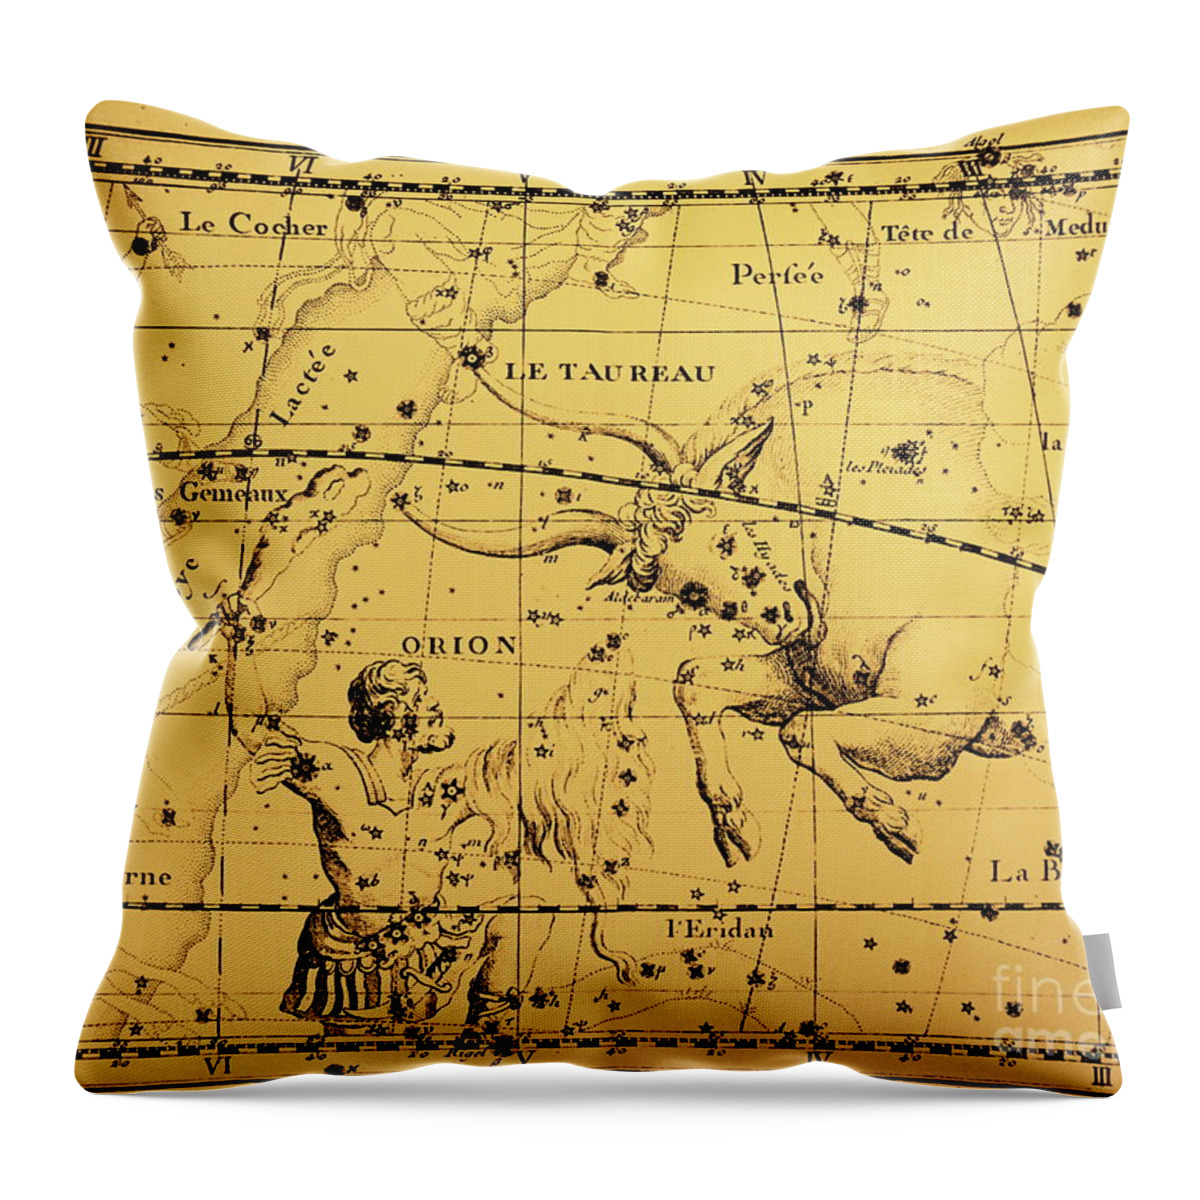 Constellation Throw Pillow featuring the painting The Constellations Orion And Taurus by European School